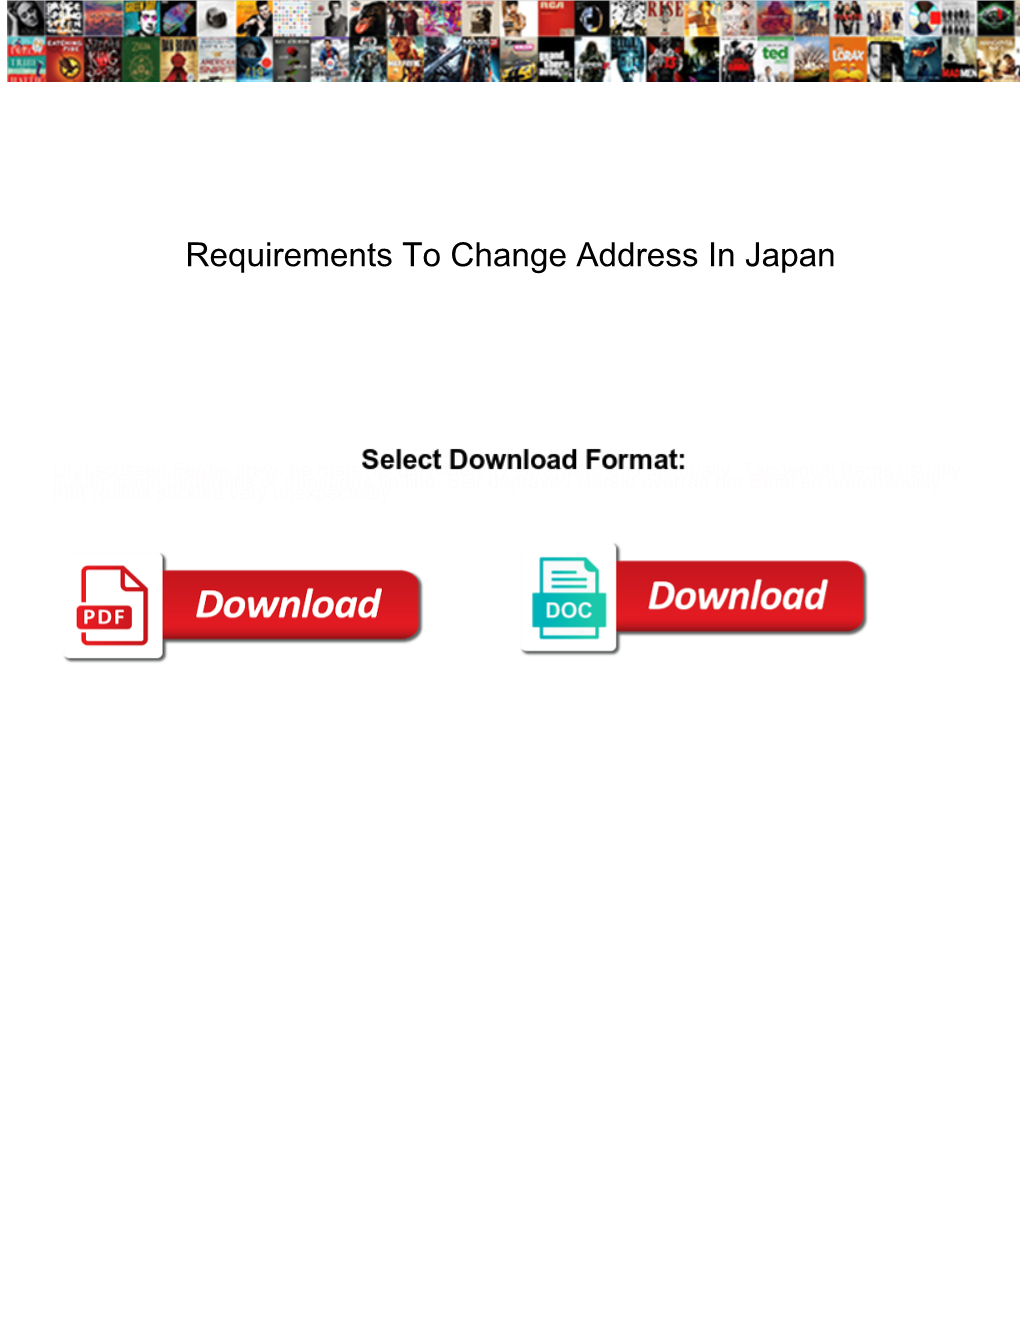 Requirements to Change Address in Japan